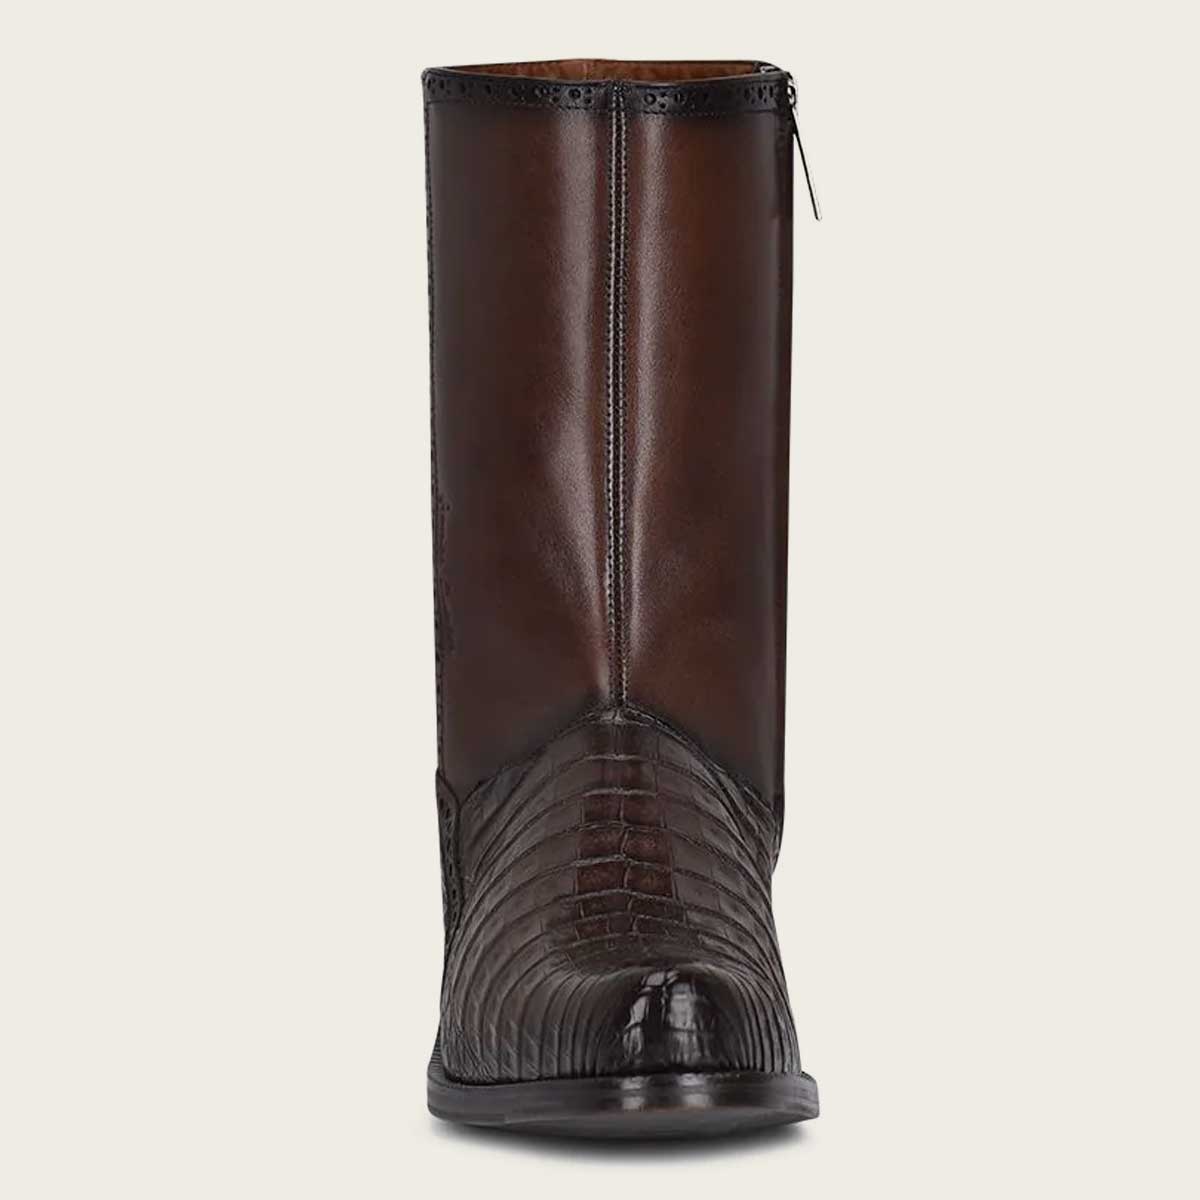 Exotic brown leather boot, hand-painted for a unique look.